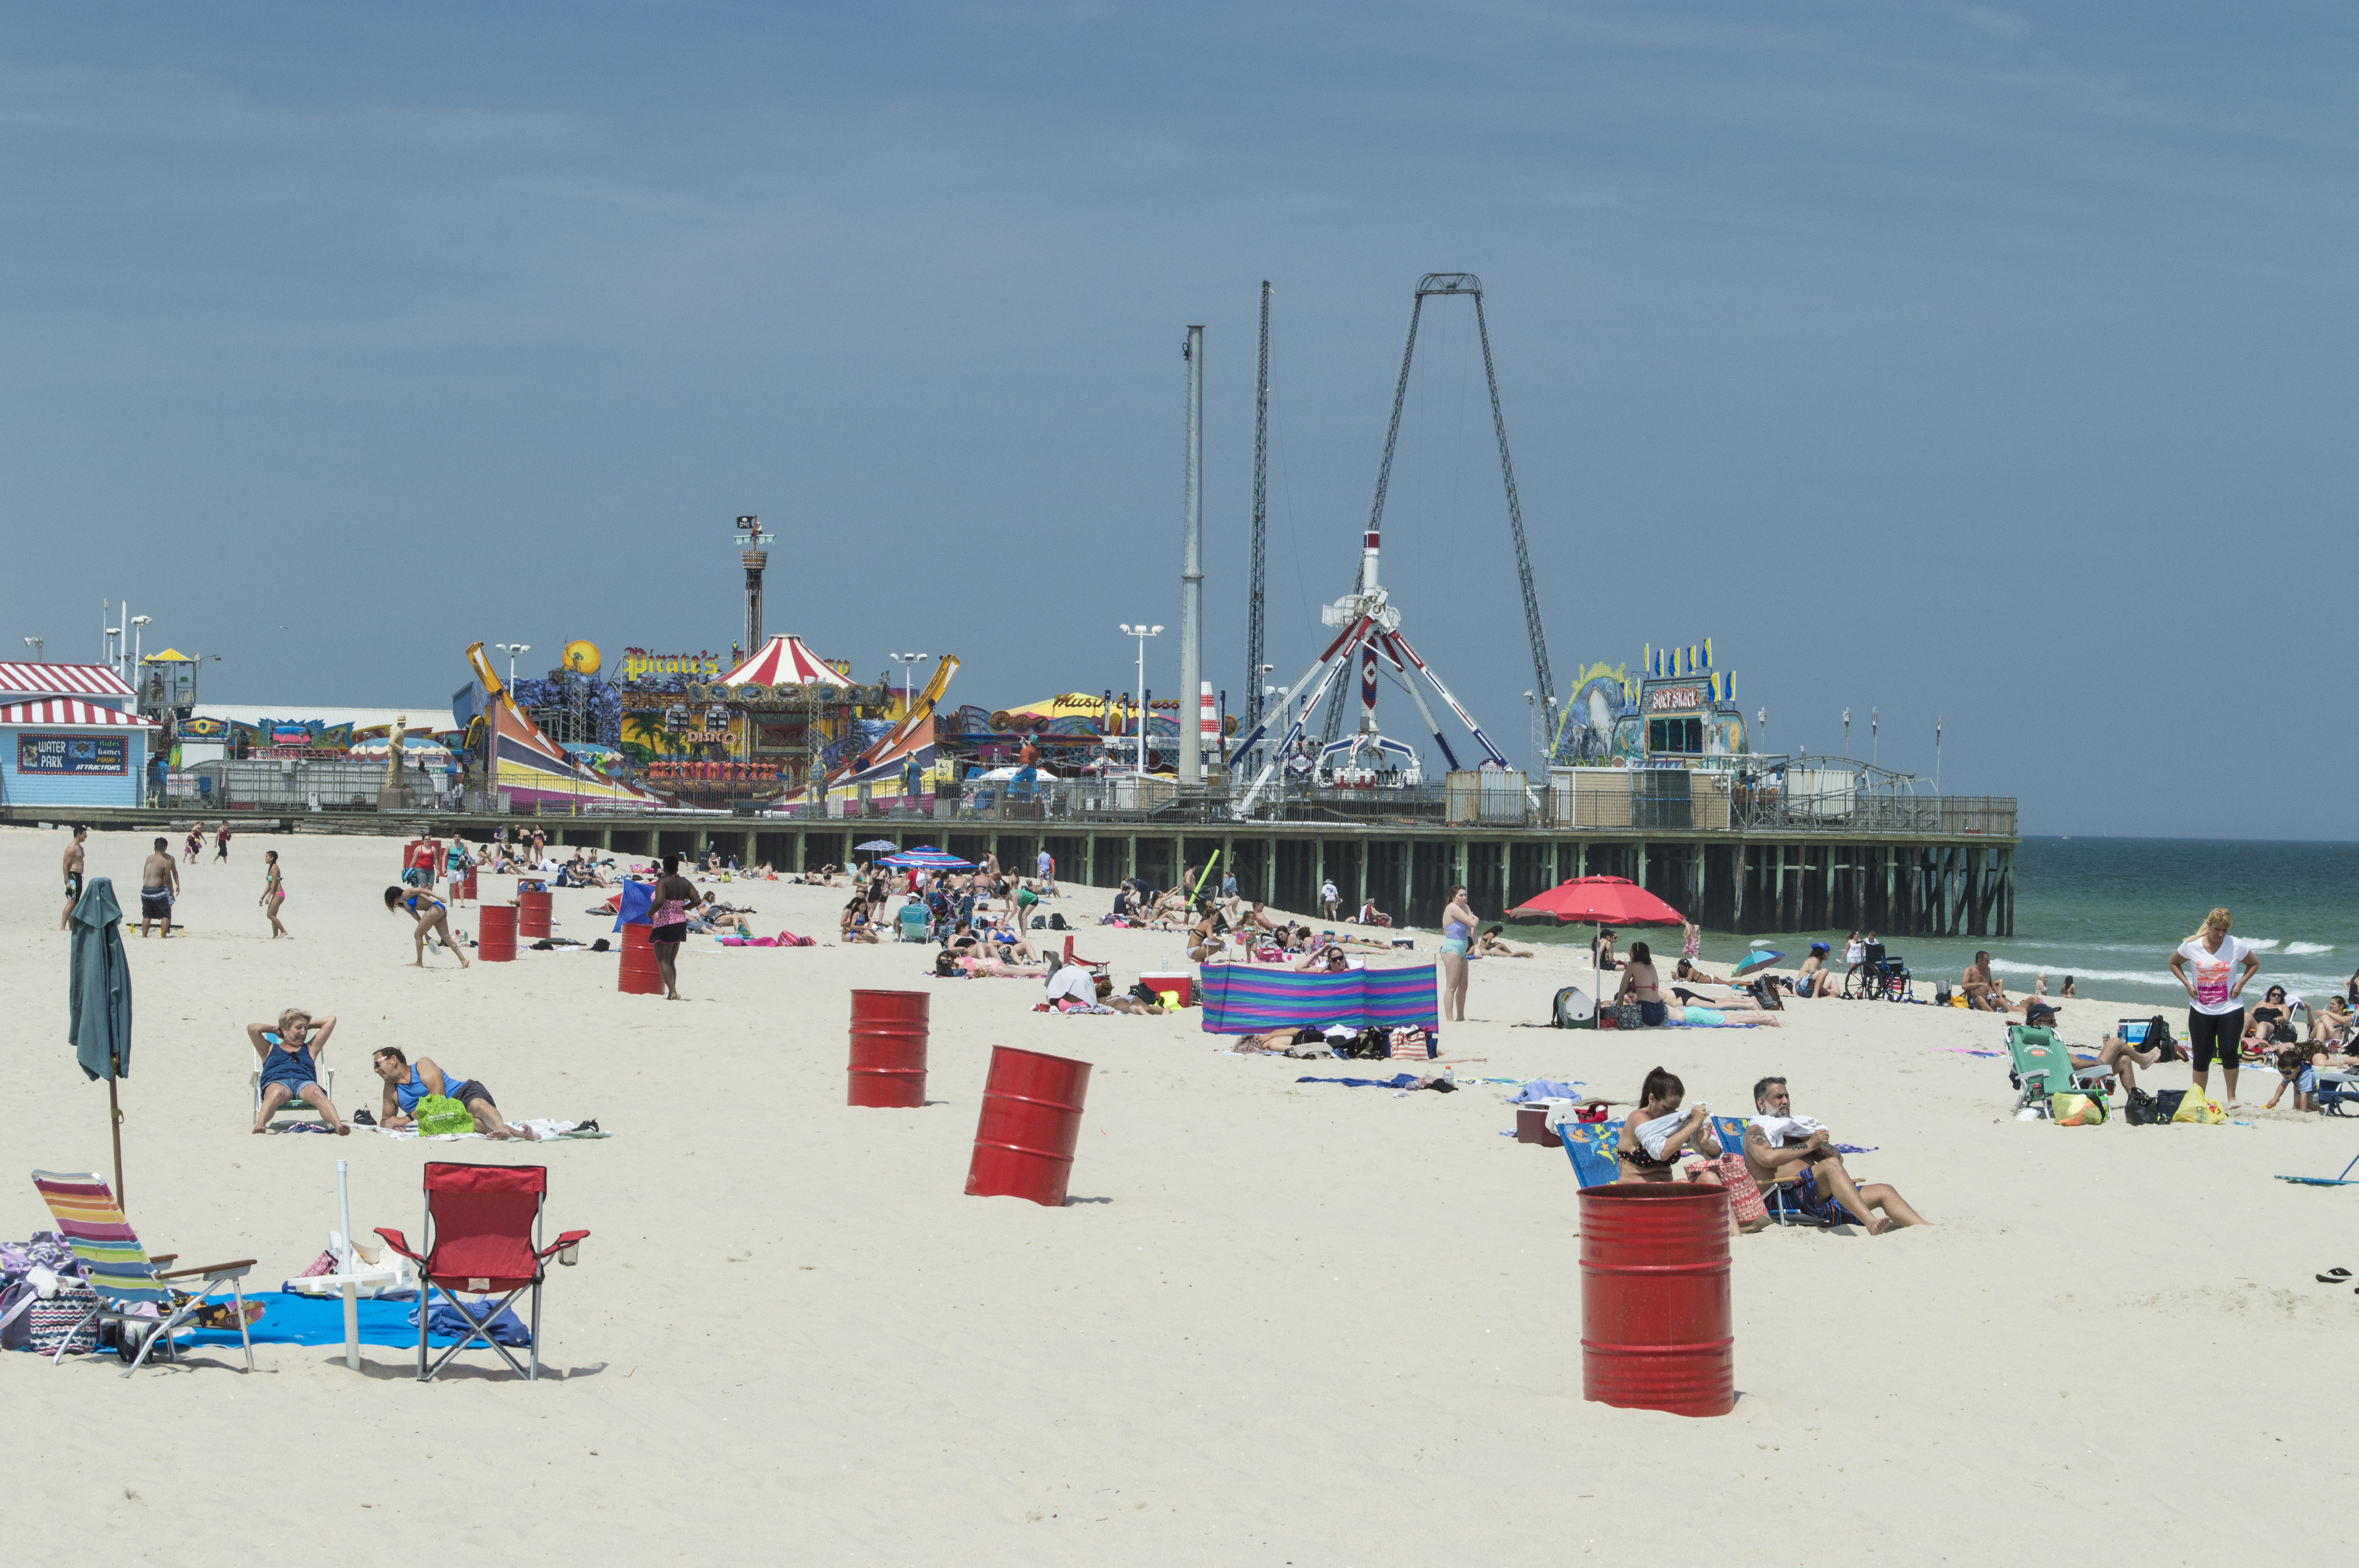 Beachgoers relax at the Webster Avenue Beach in Seaside Heights, May 26, 2016. (Photo: Daniel Nee)